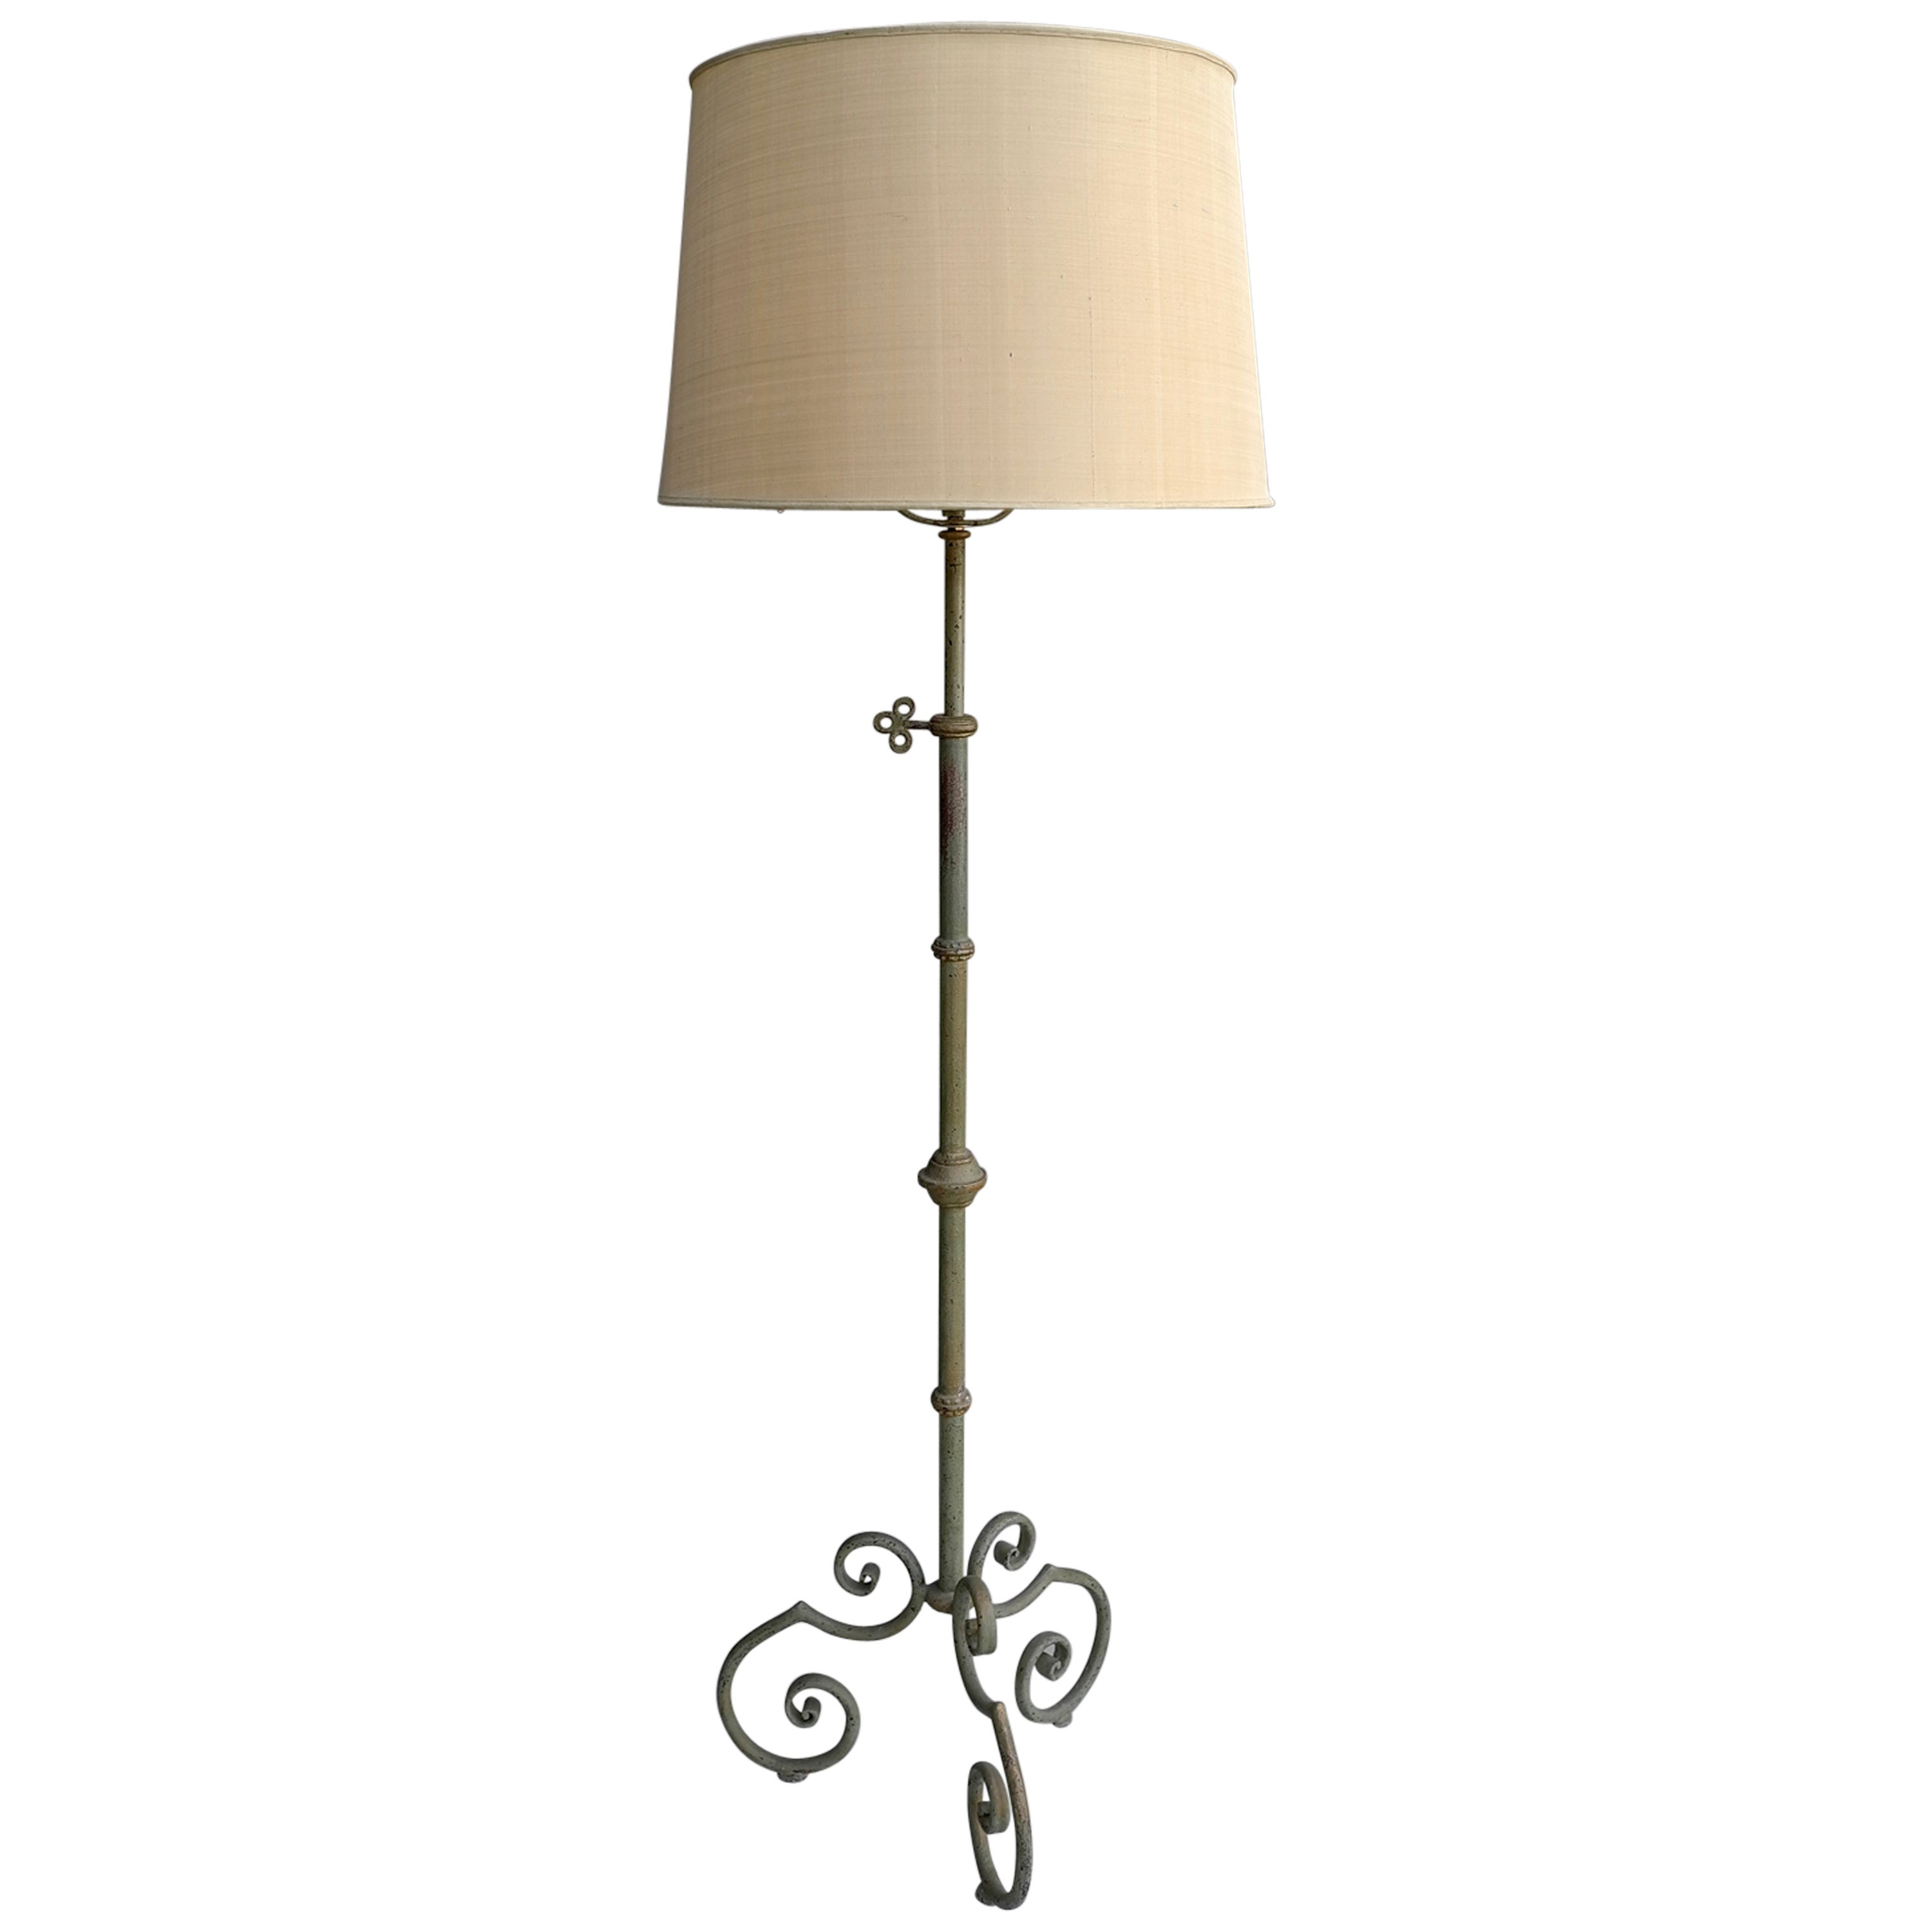 Wrought Iron Provincial Green Patina Floorlamp with Silk Shade, France, 1940's